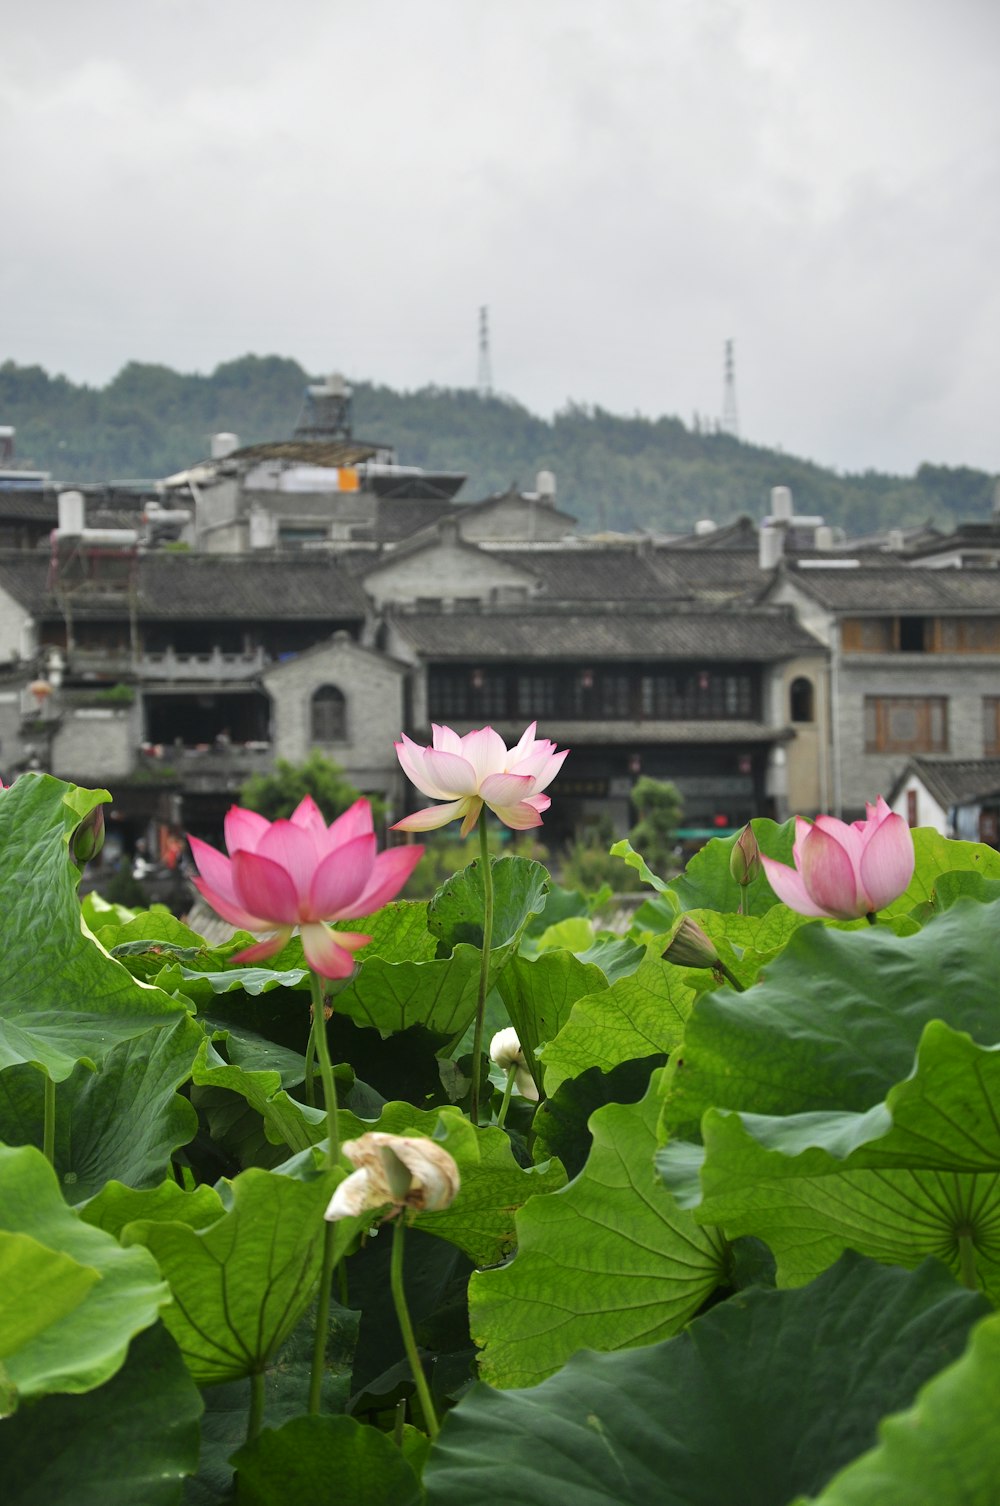 pink lotus flowers blooming in front of a building